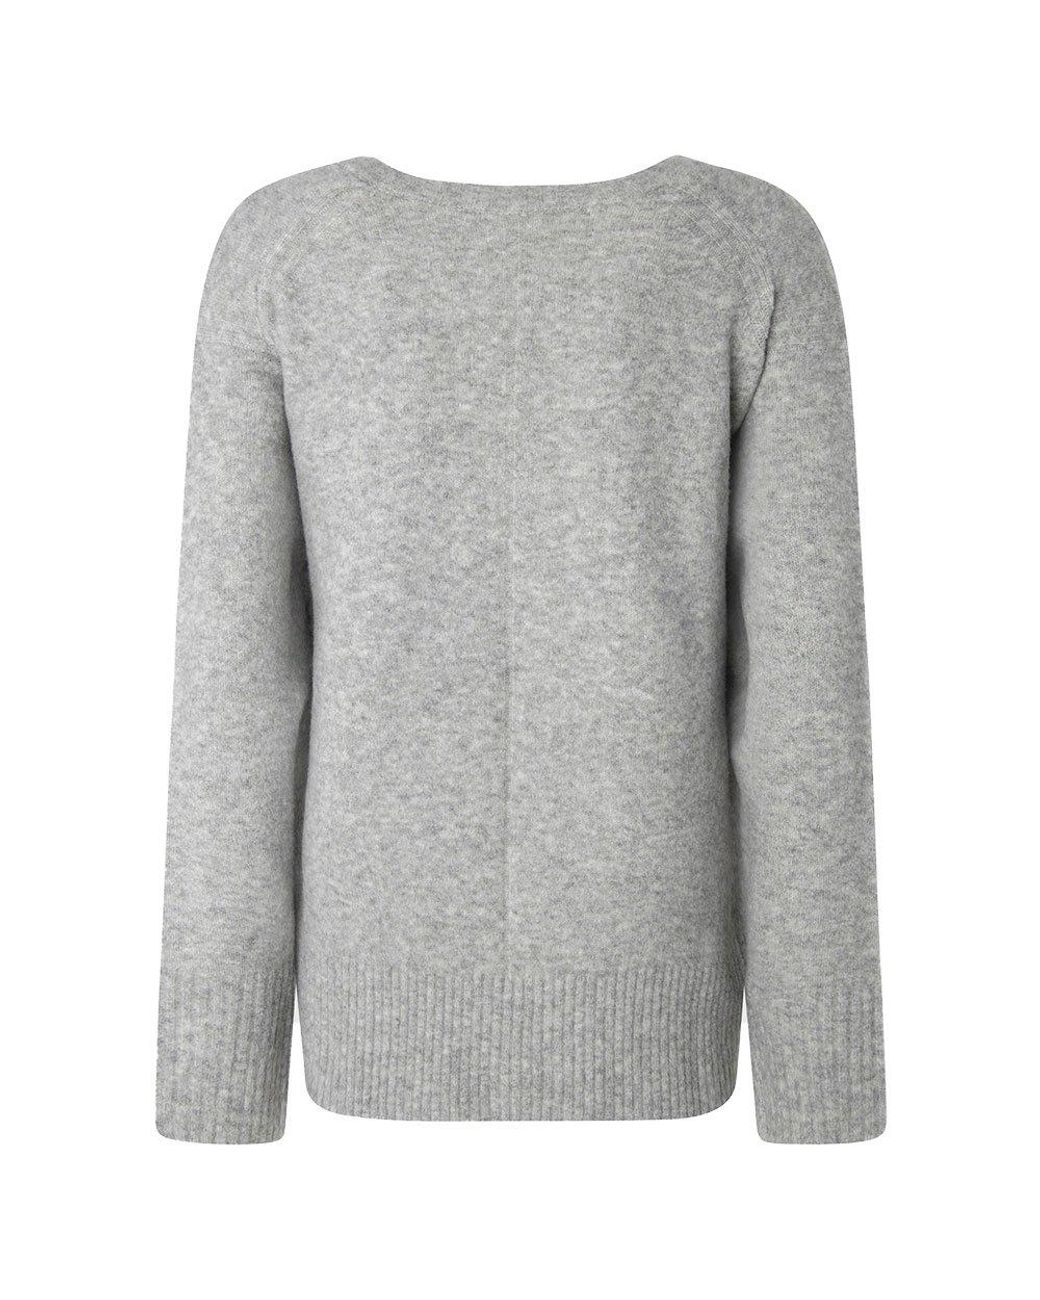 Pepe Jeans Pepe Jean Becca Weater in Gray | Lyst